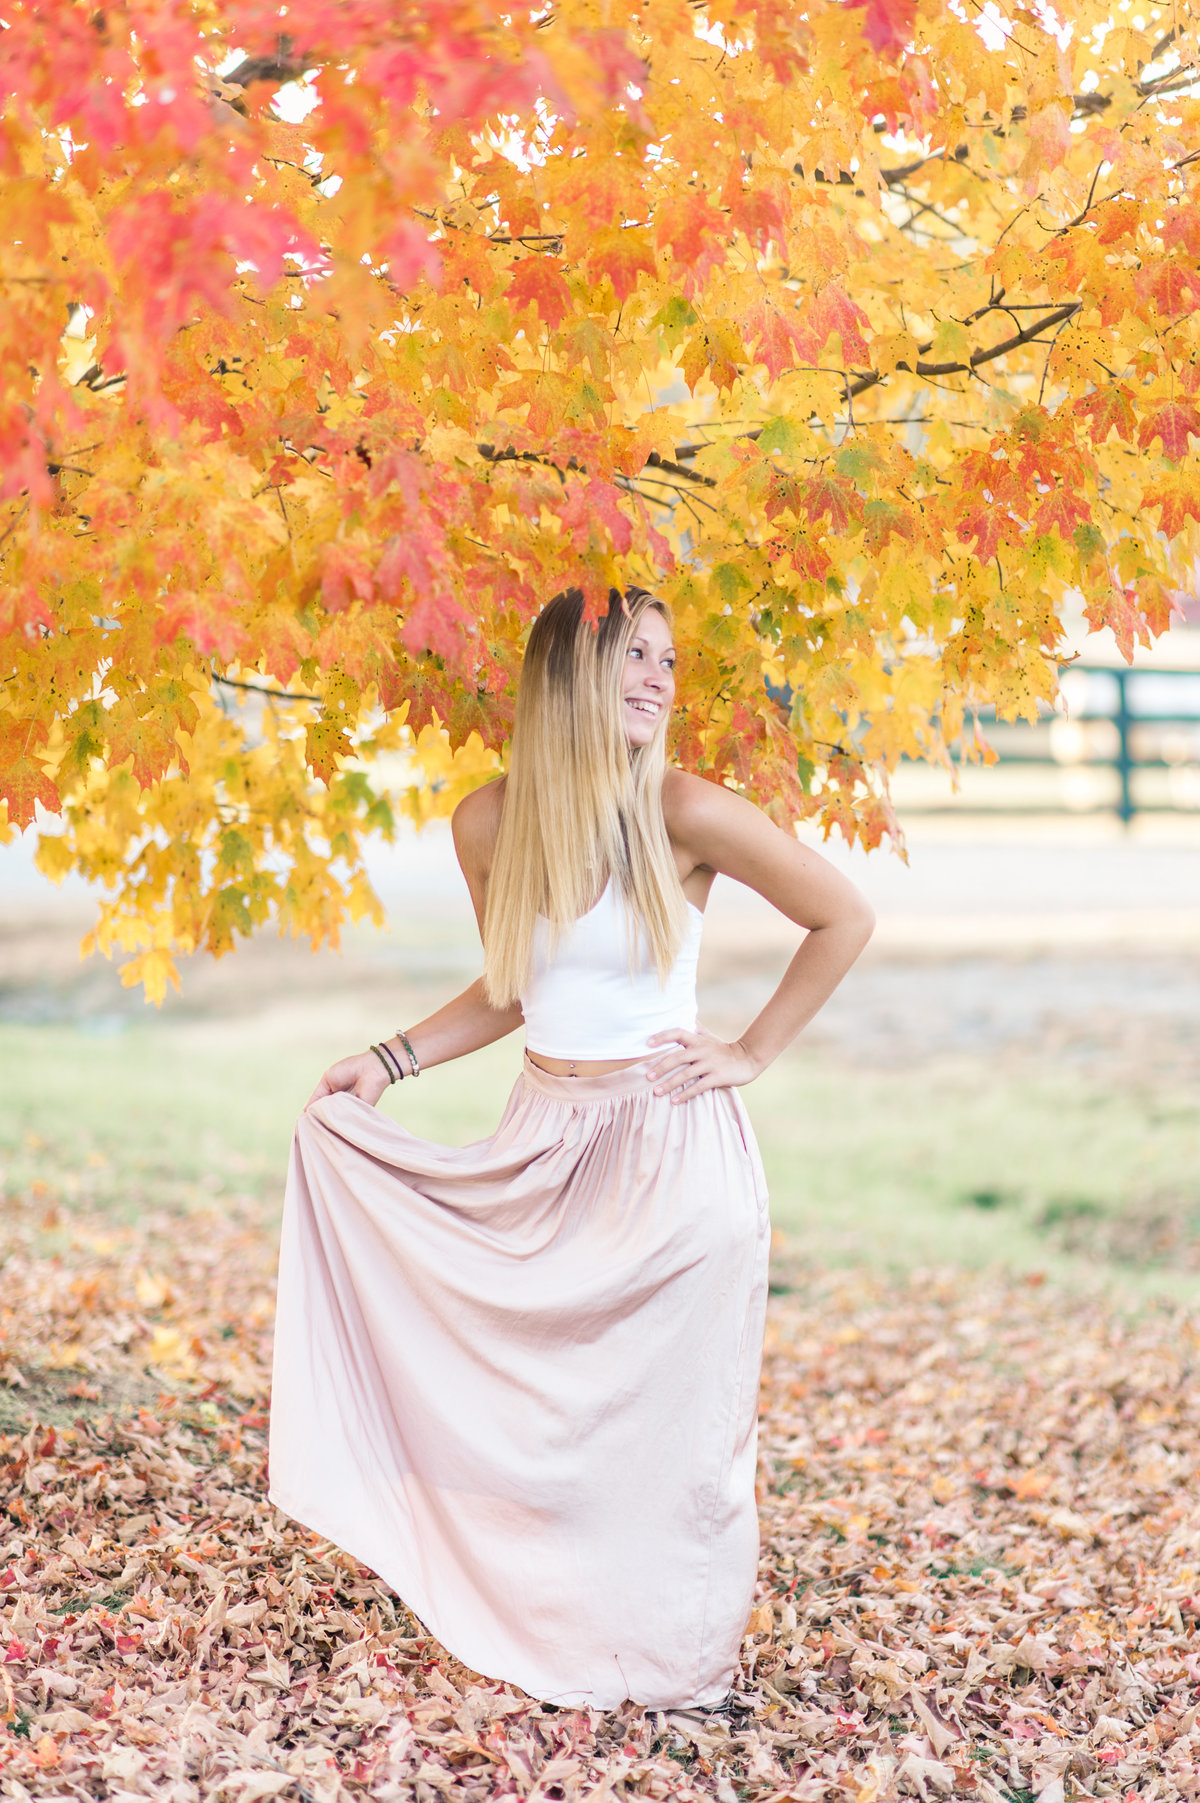 Young woman holds her dress as she smiles under a colorful tree during fall.